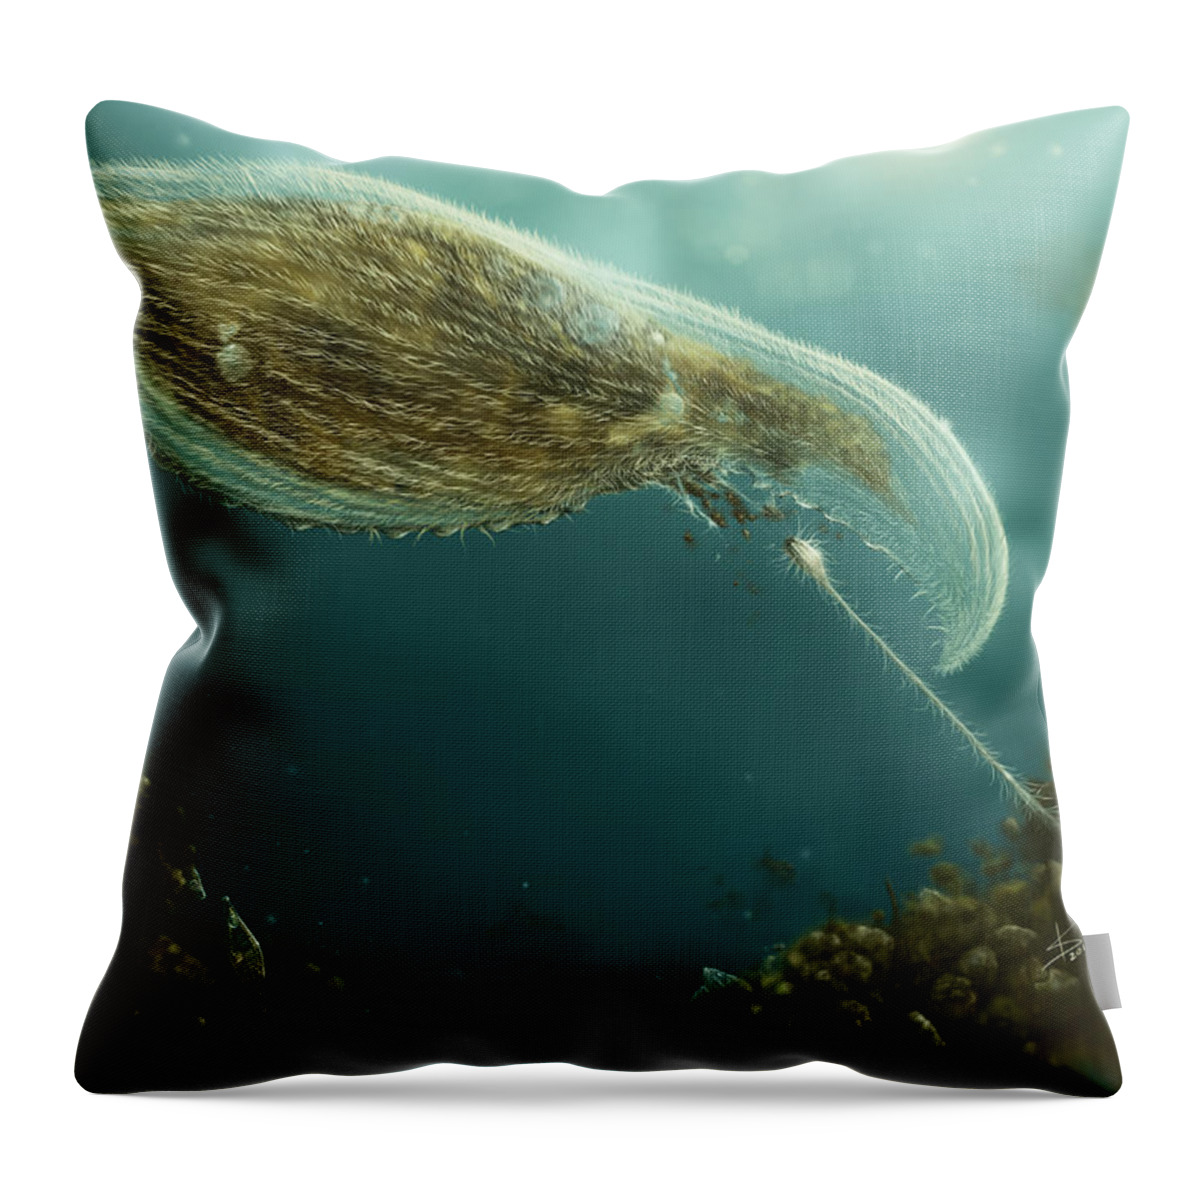 Protozoa Throw Pillow featuring the digital art Loxophyllum attacked by Lacrymaria by Kate Solbakk